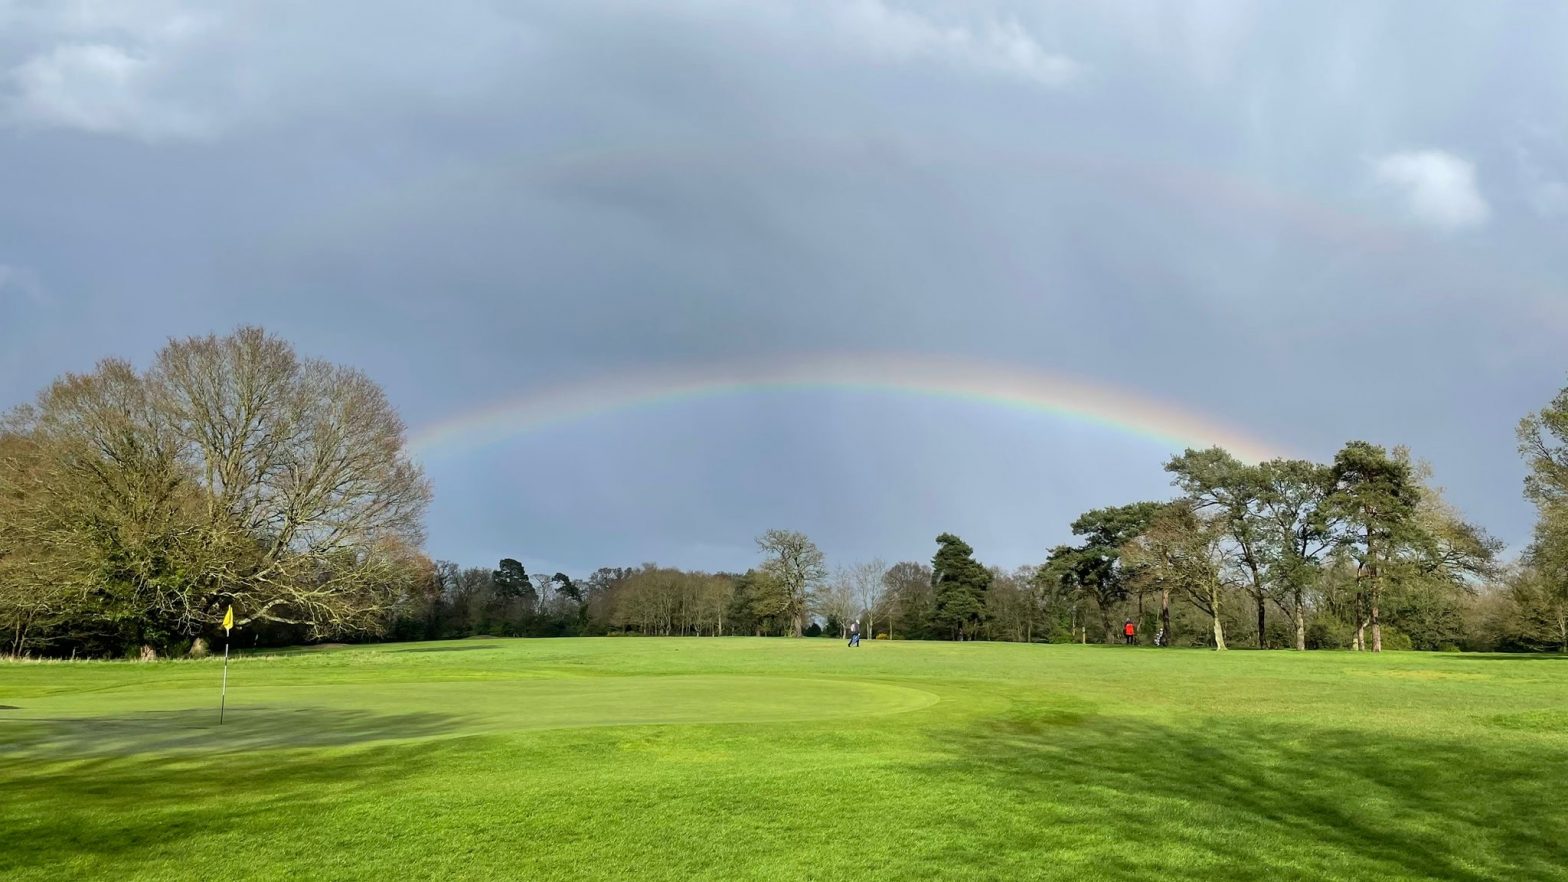 As a green open space Maidenhead Golf Course soaks up rainfall and reduces flood risk in Maidenhead